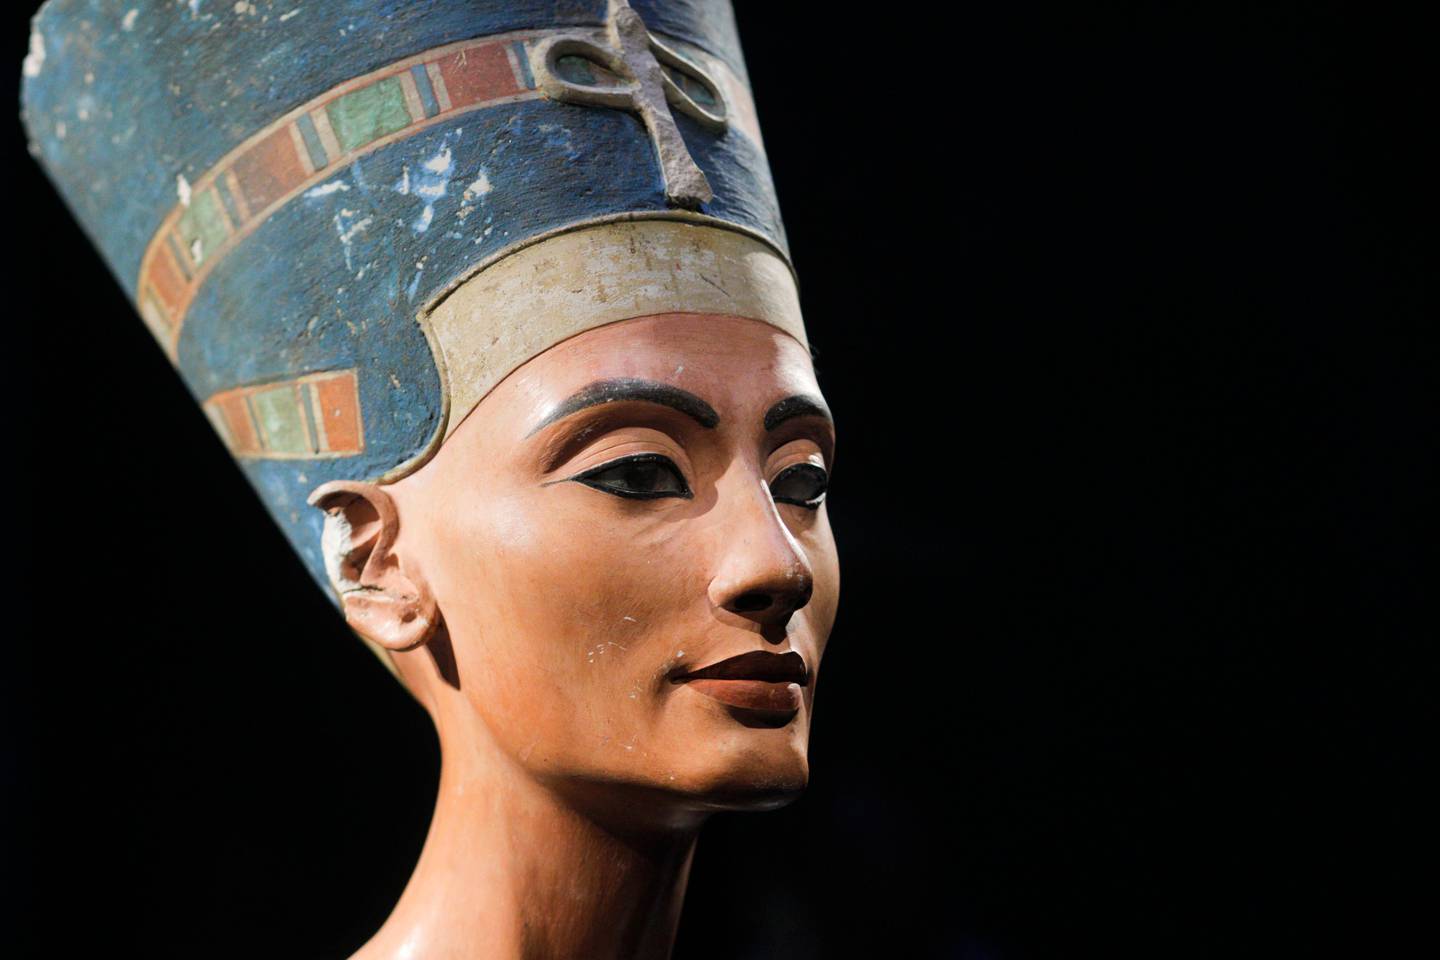 FILE - In this Oct. 15, 2009 file photo, the 3,300-year-old bust of Queen Nefertiti is seen at the "Neues Museum", New Museum, on the so-called Museum Island during a media preview in Berlin, Germany. Egypt's antiquities chief said Sunday, Dec. 20, 2009 he will formally demand the return of the 3,300-year old bust of Queen Nefertiti kept in a Berlin museum after confirming it was sneaked out of Cairo through fraudulent documents. (AP Photo/Markus Schreiber, File)